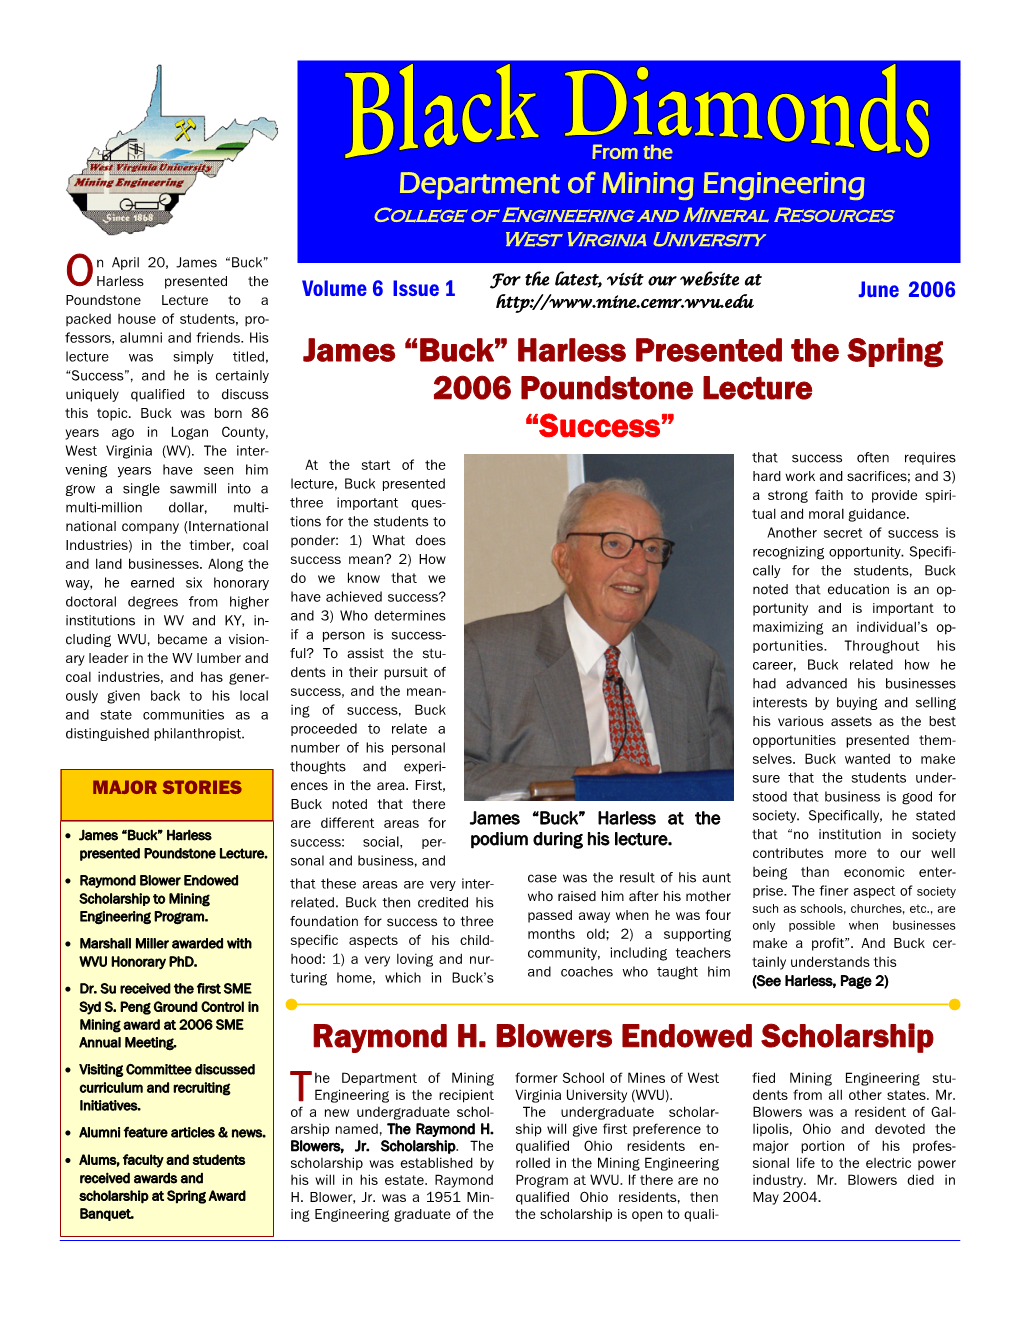 James “Buck” Harless Presented the Spring 2006 Poundstone Lecture